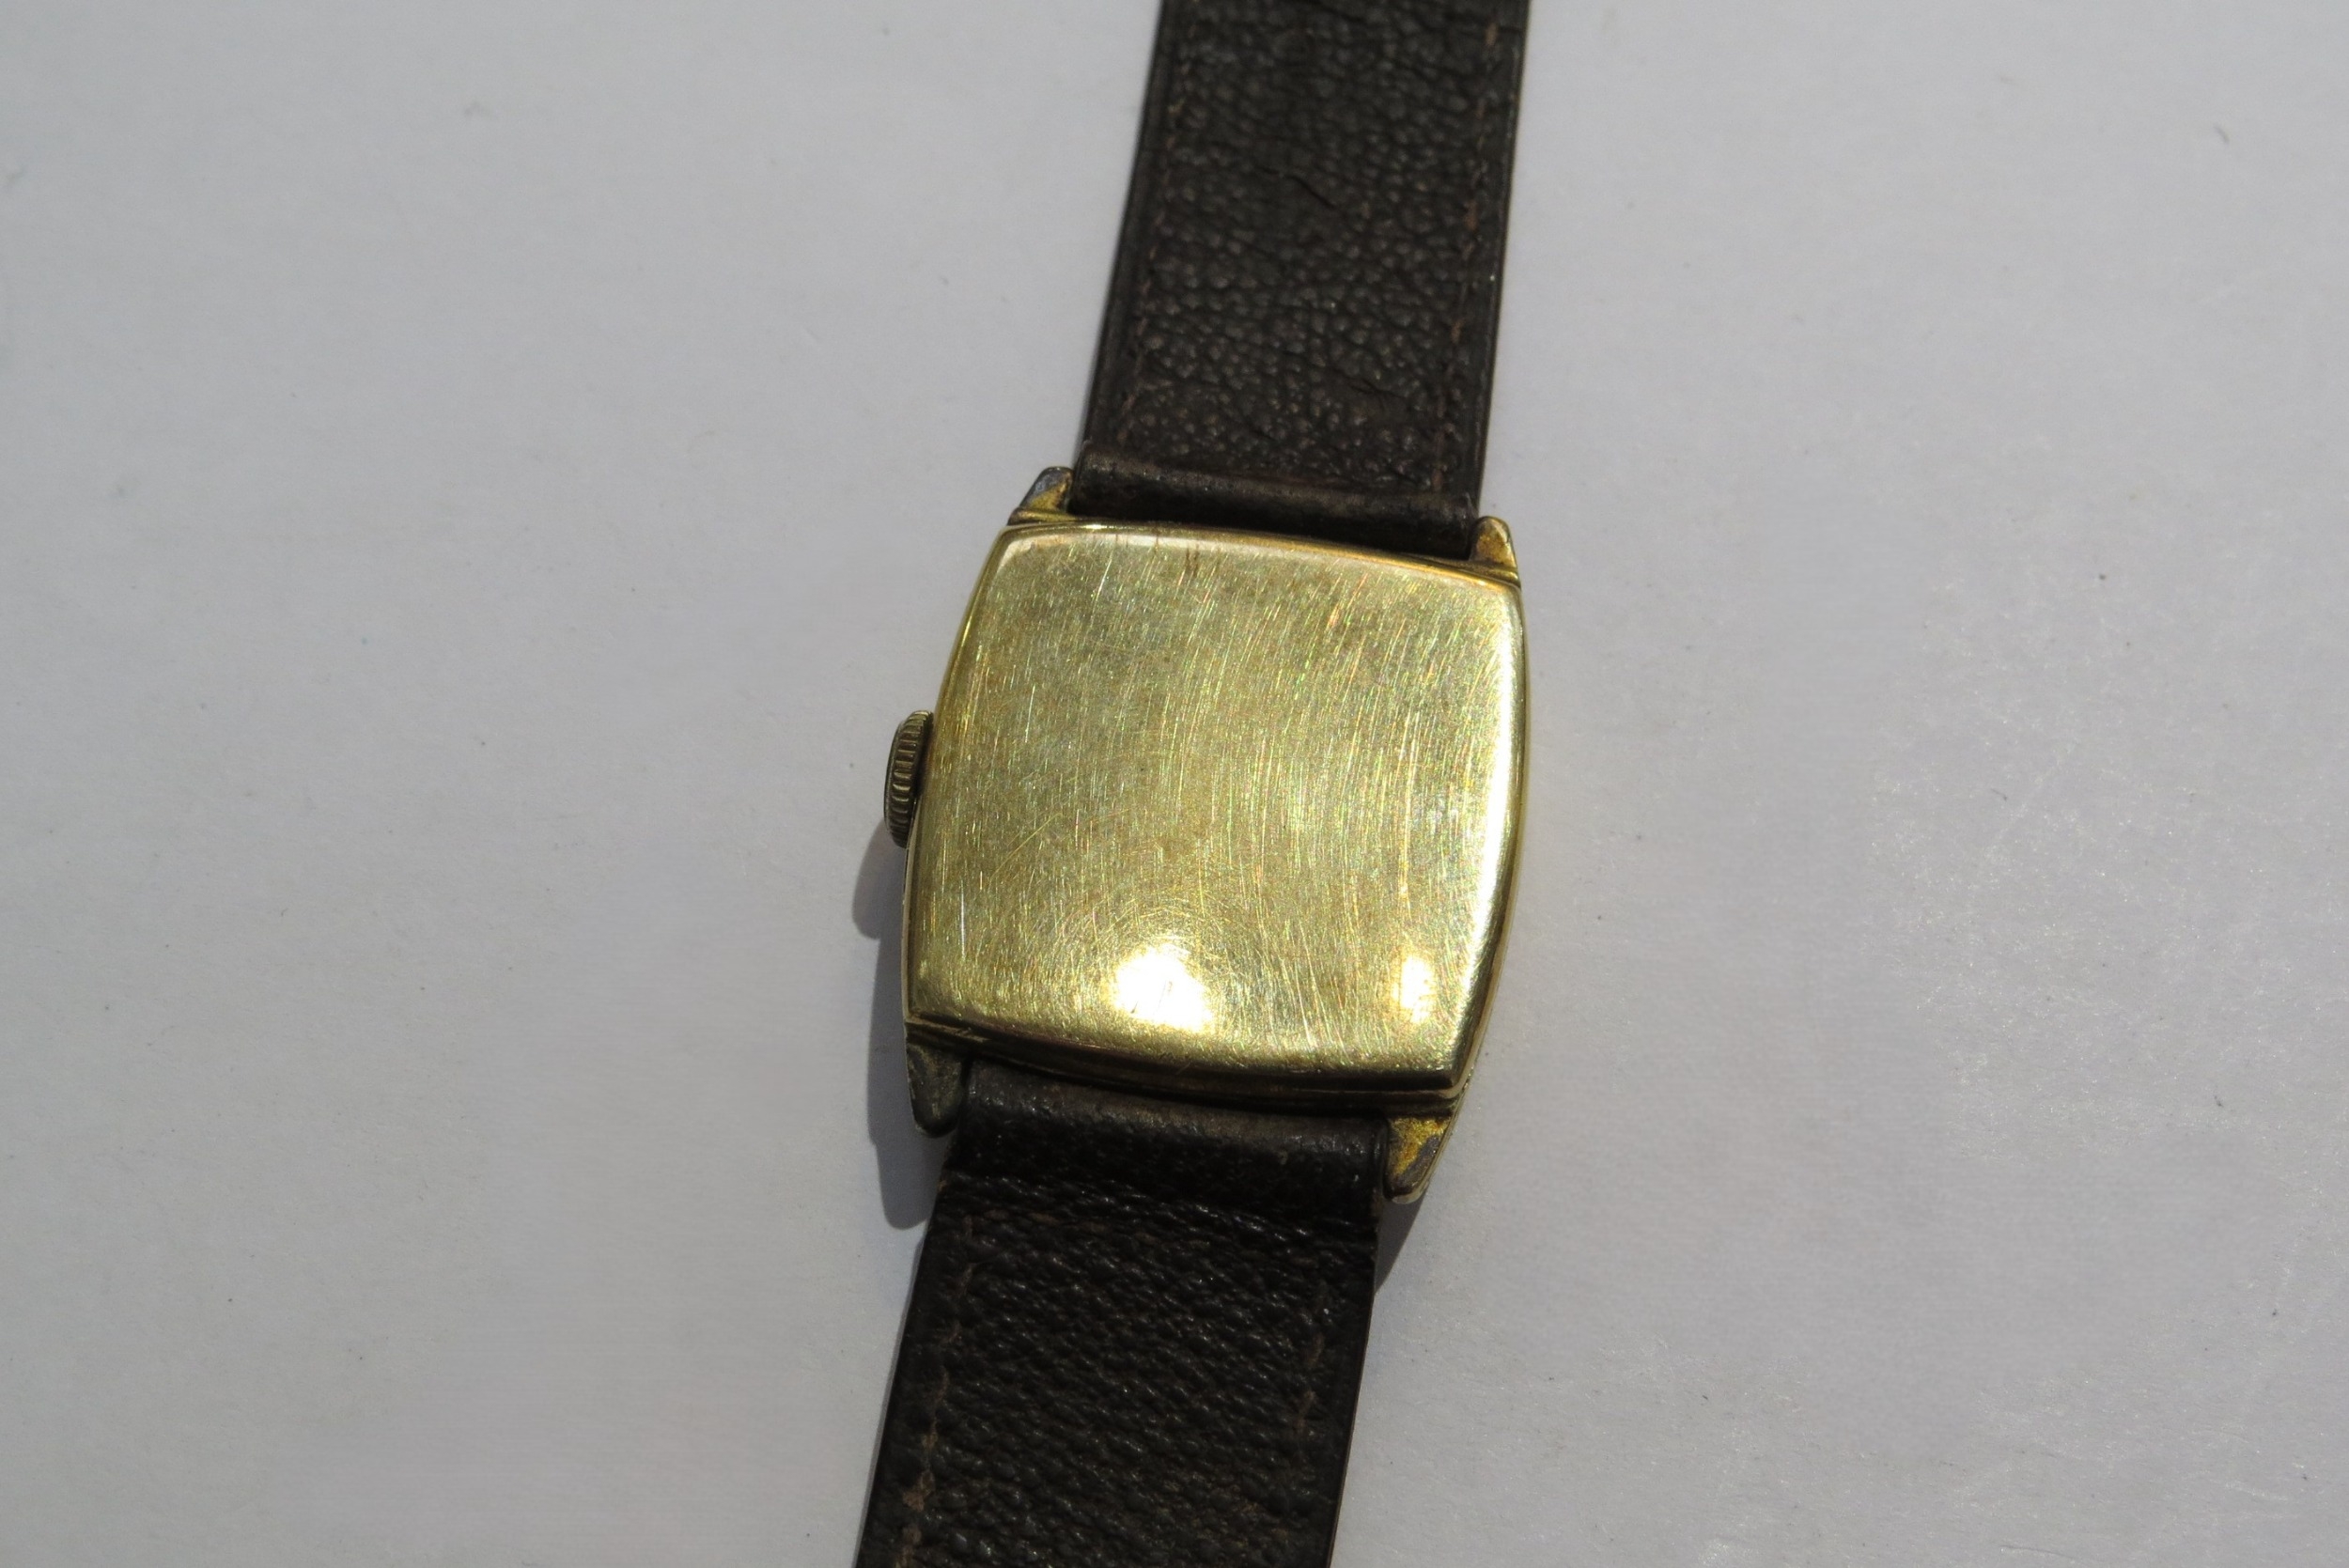 A vintage Omega 9ct gold cased manual wind wristwatch, second hand missing, strap may need replacing - Image 3 of 6